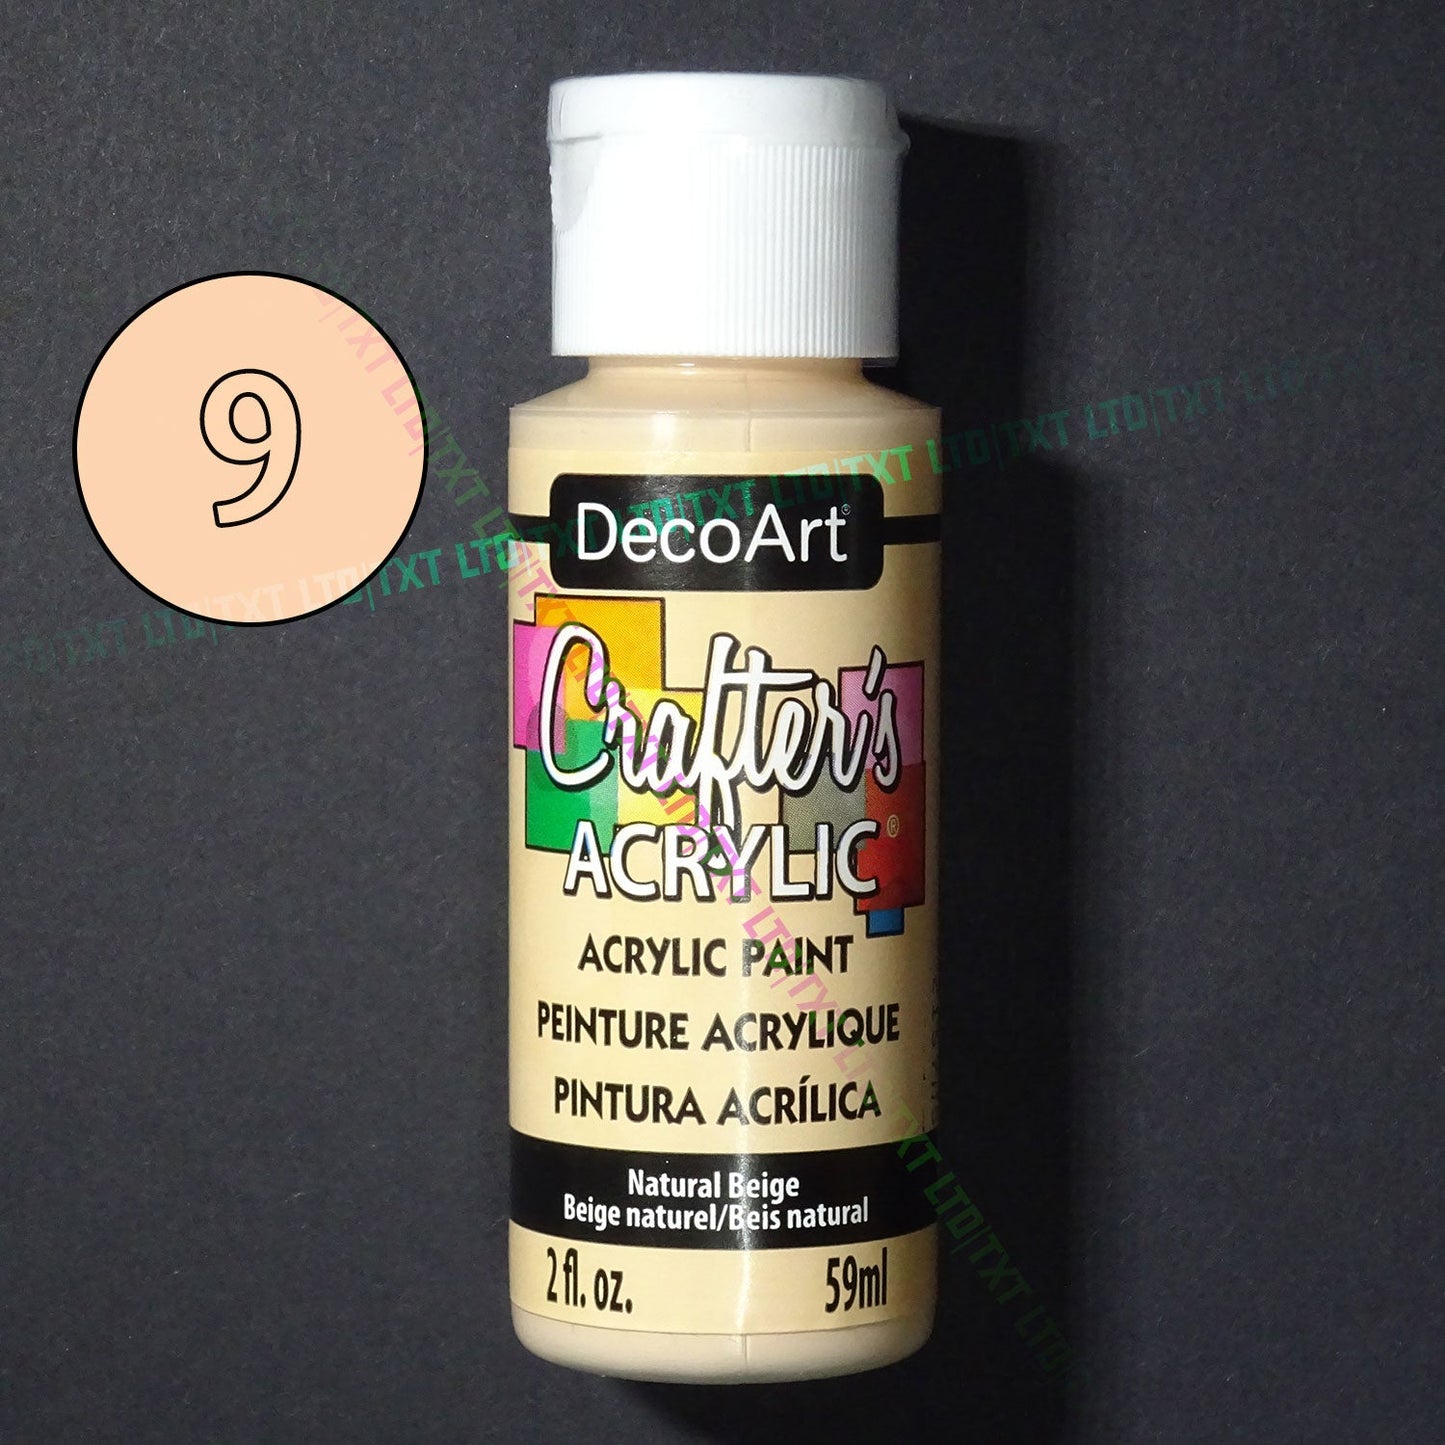 DecoArt Crafters Acrylic, 59ml/2oz. [colours 1 to 103]